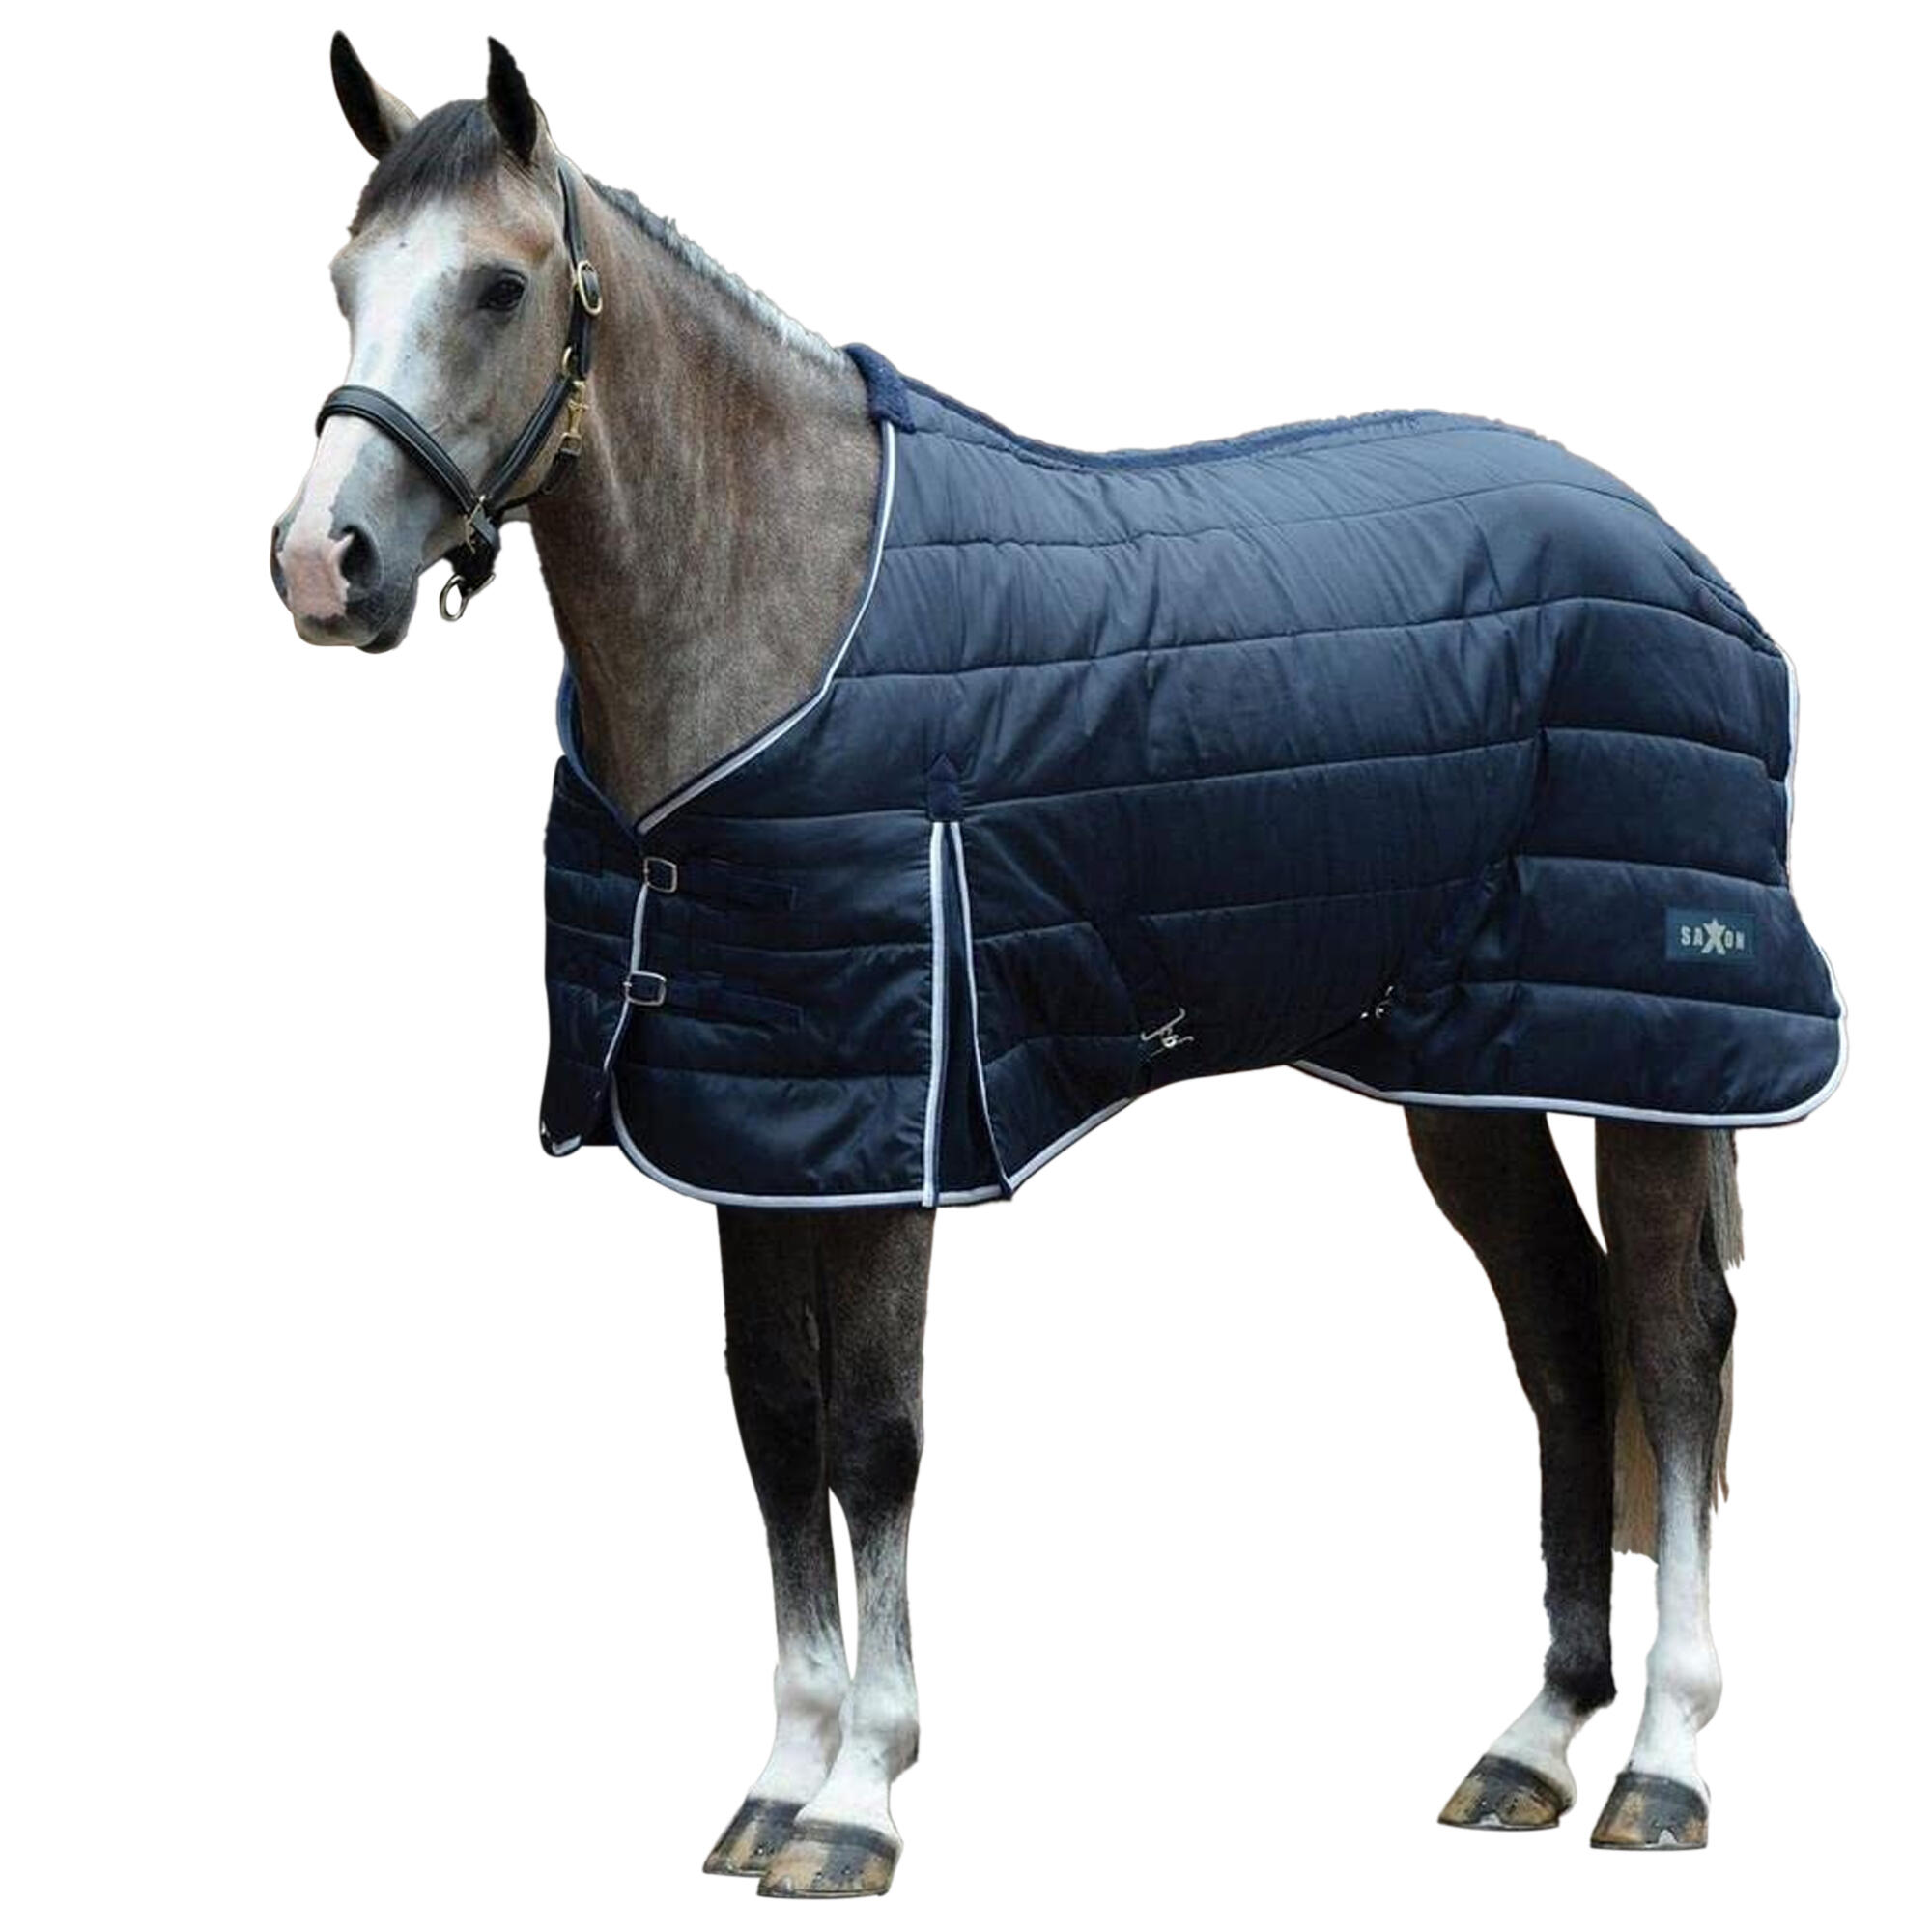 StandardNeck Channel Quilt Midweight Horse Stable Rug (Navy/White) 3/3